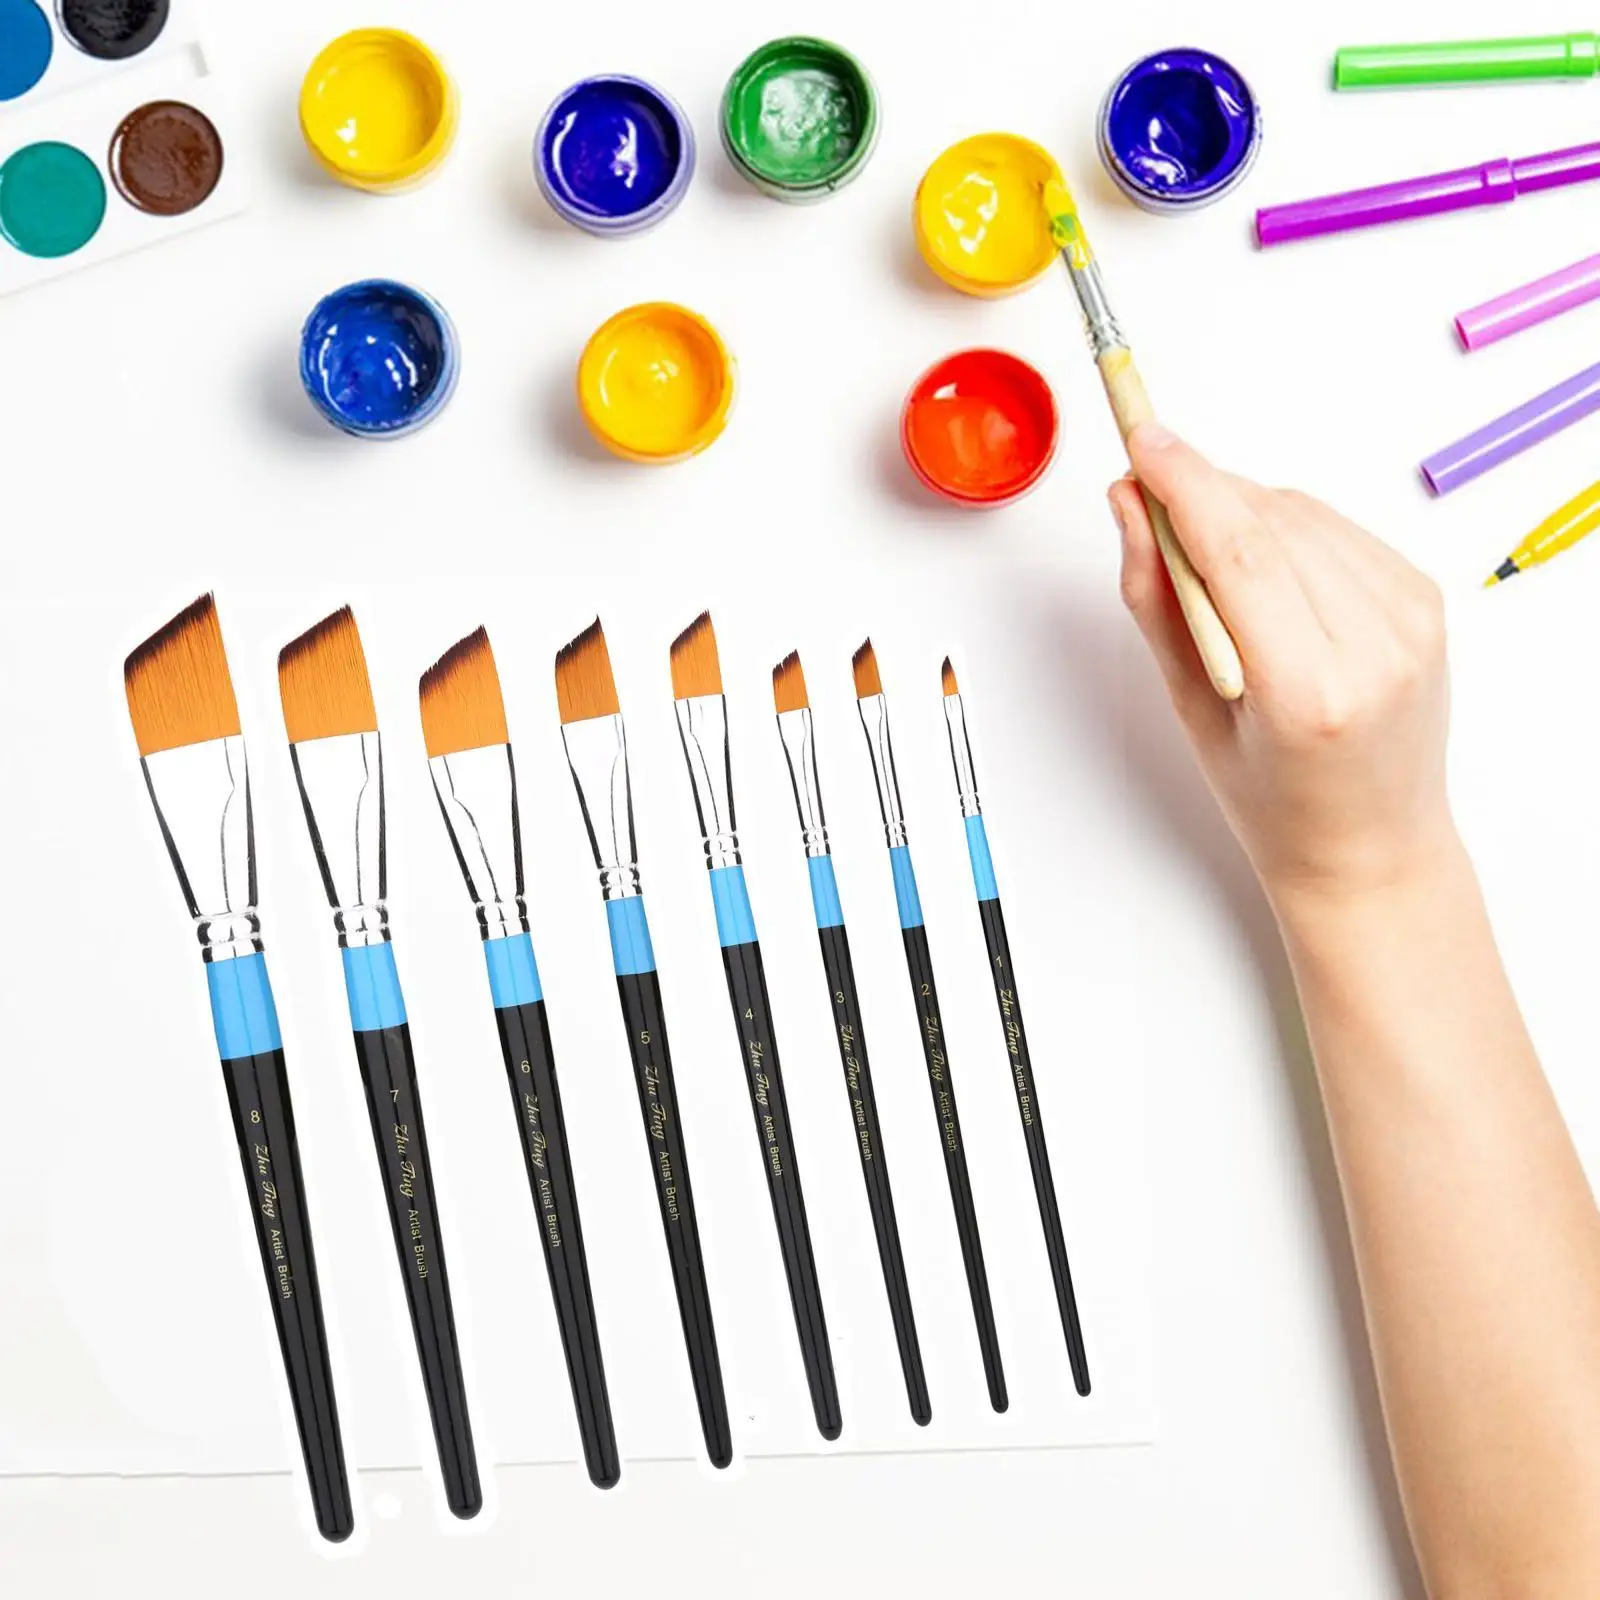 8Pcs Paint Brush Set Slanted Tip Nylon Hair Wooden Handle Long Handle for Kids Adults Painting Brushes Set for Oil Painting